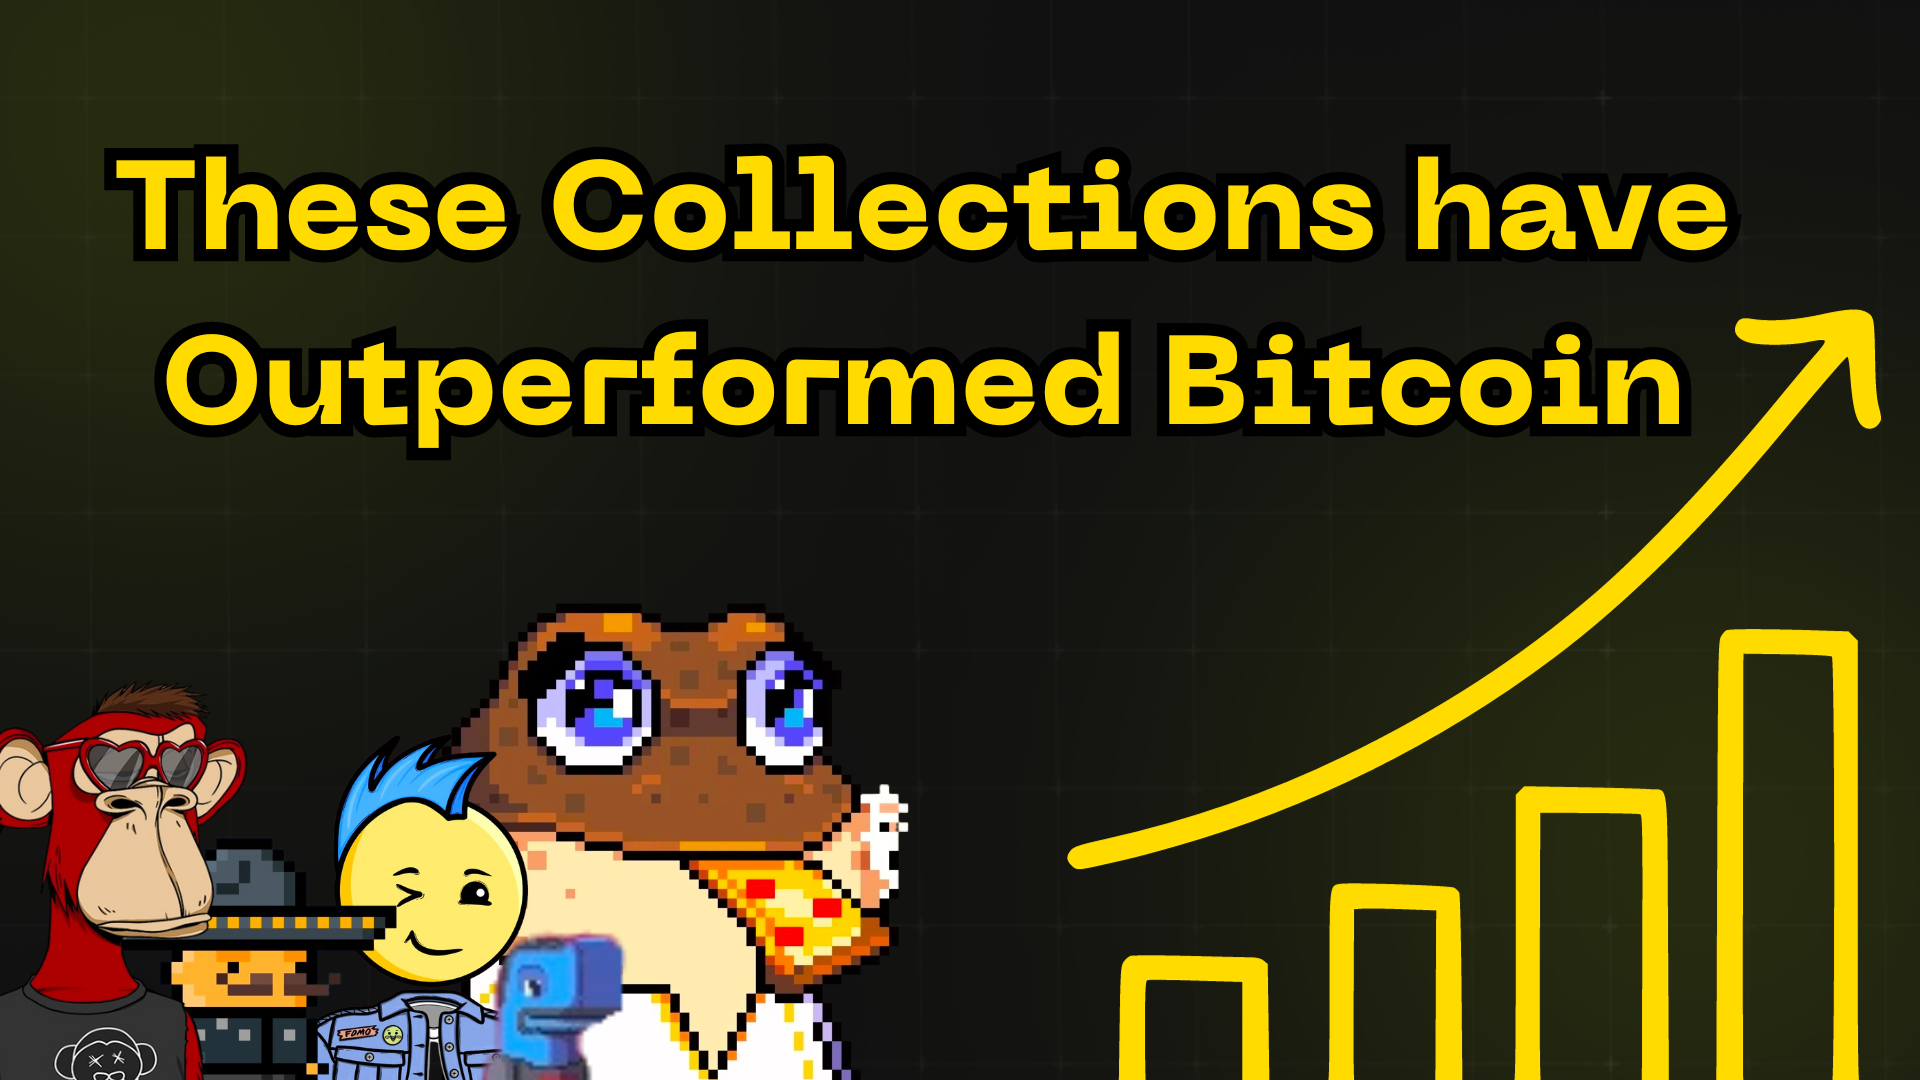 These Bitcoin Ordinals Collections have outperformed Bitcoin